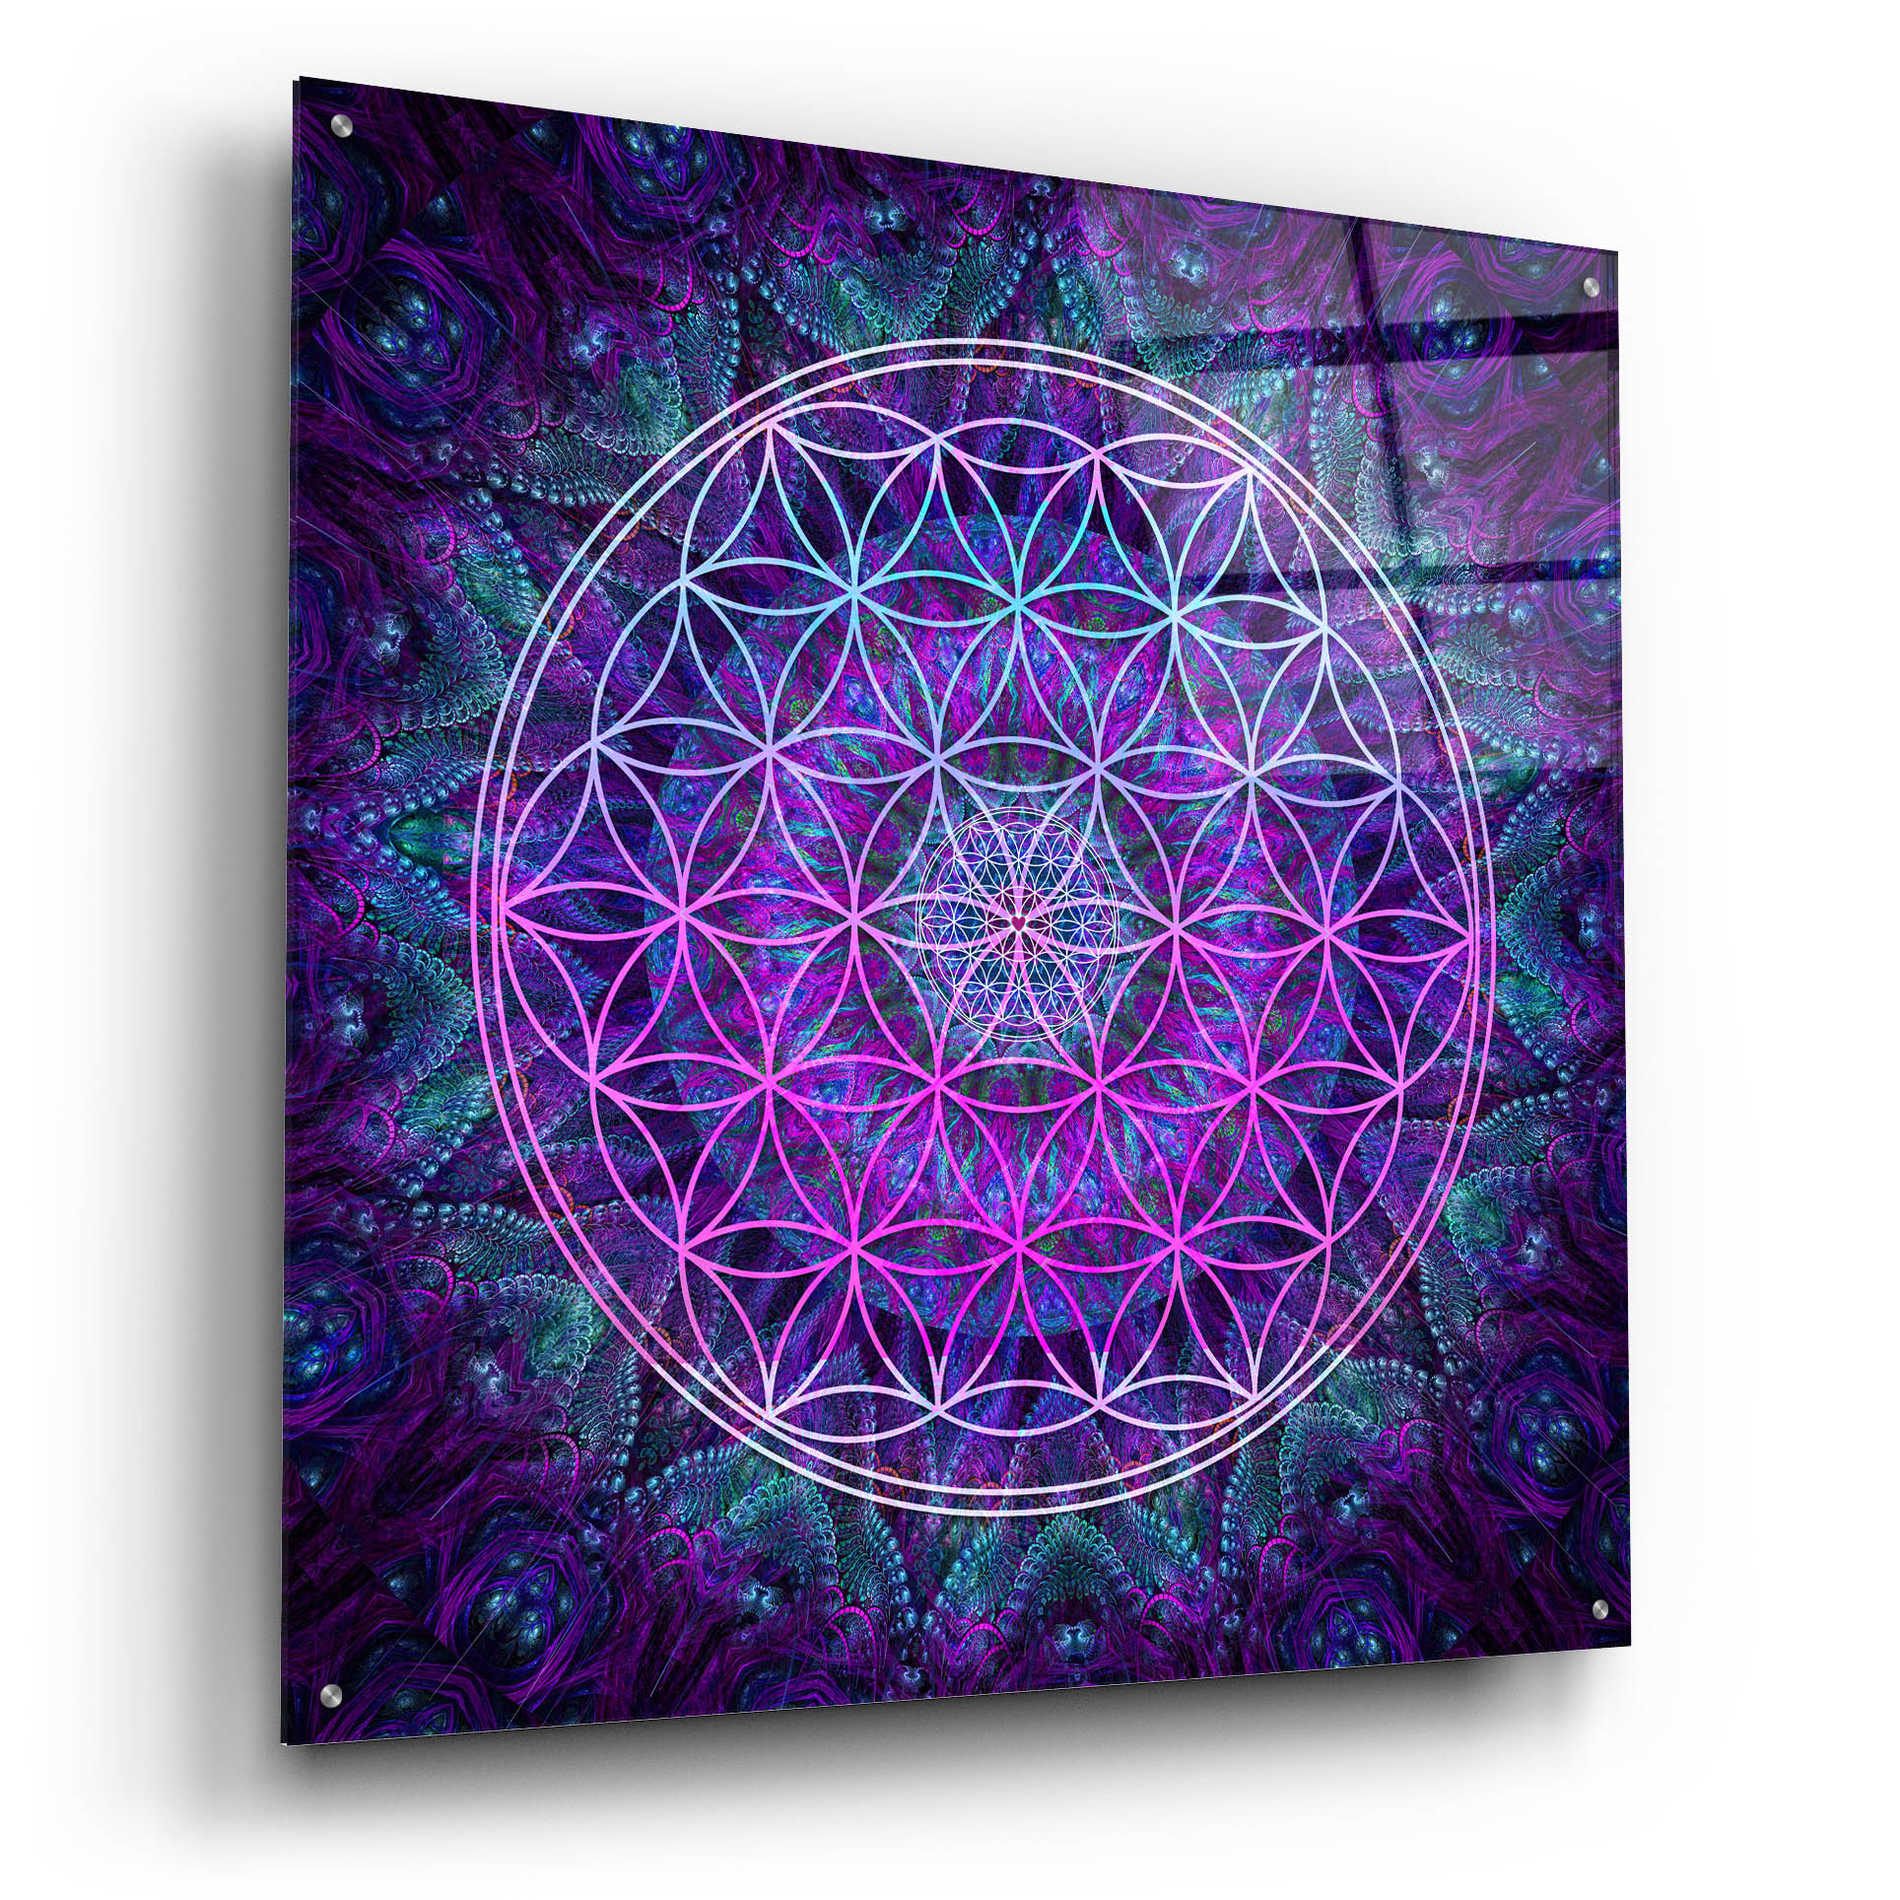 Epic Art 'Flower Of Life' by Cameron Gray Acrylic Glass Wall Art,36x36